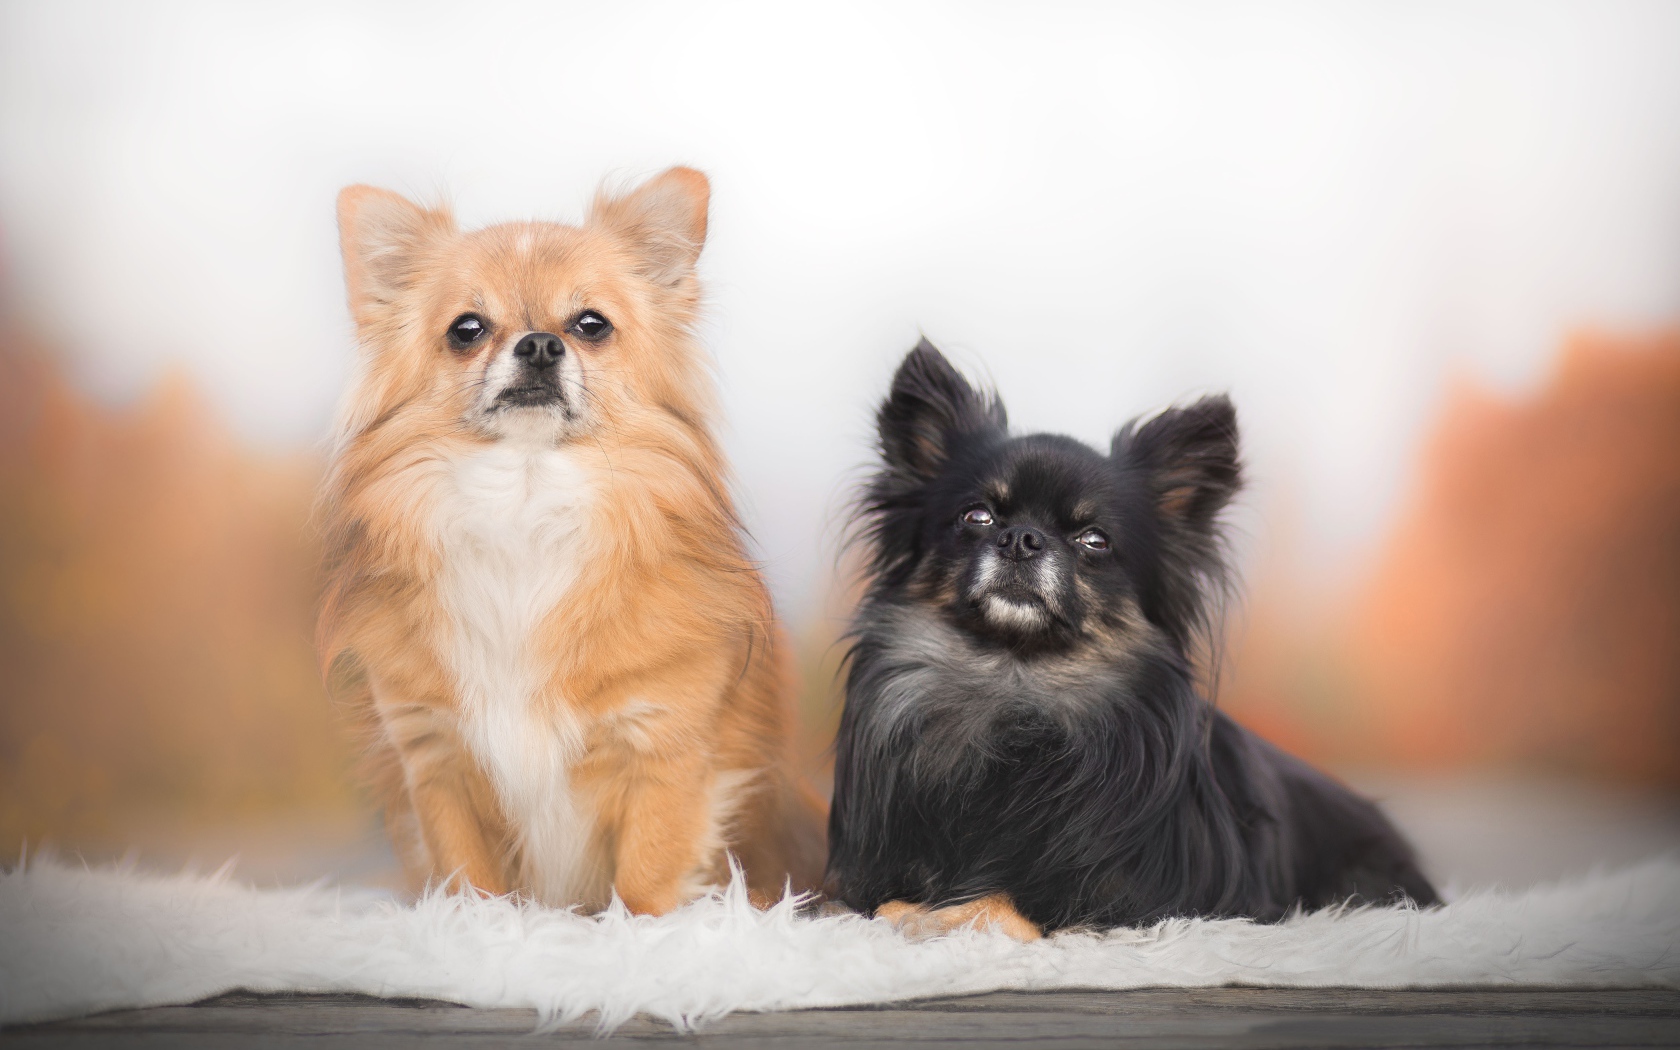 Two long haired chihuahua dogs